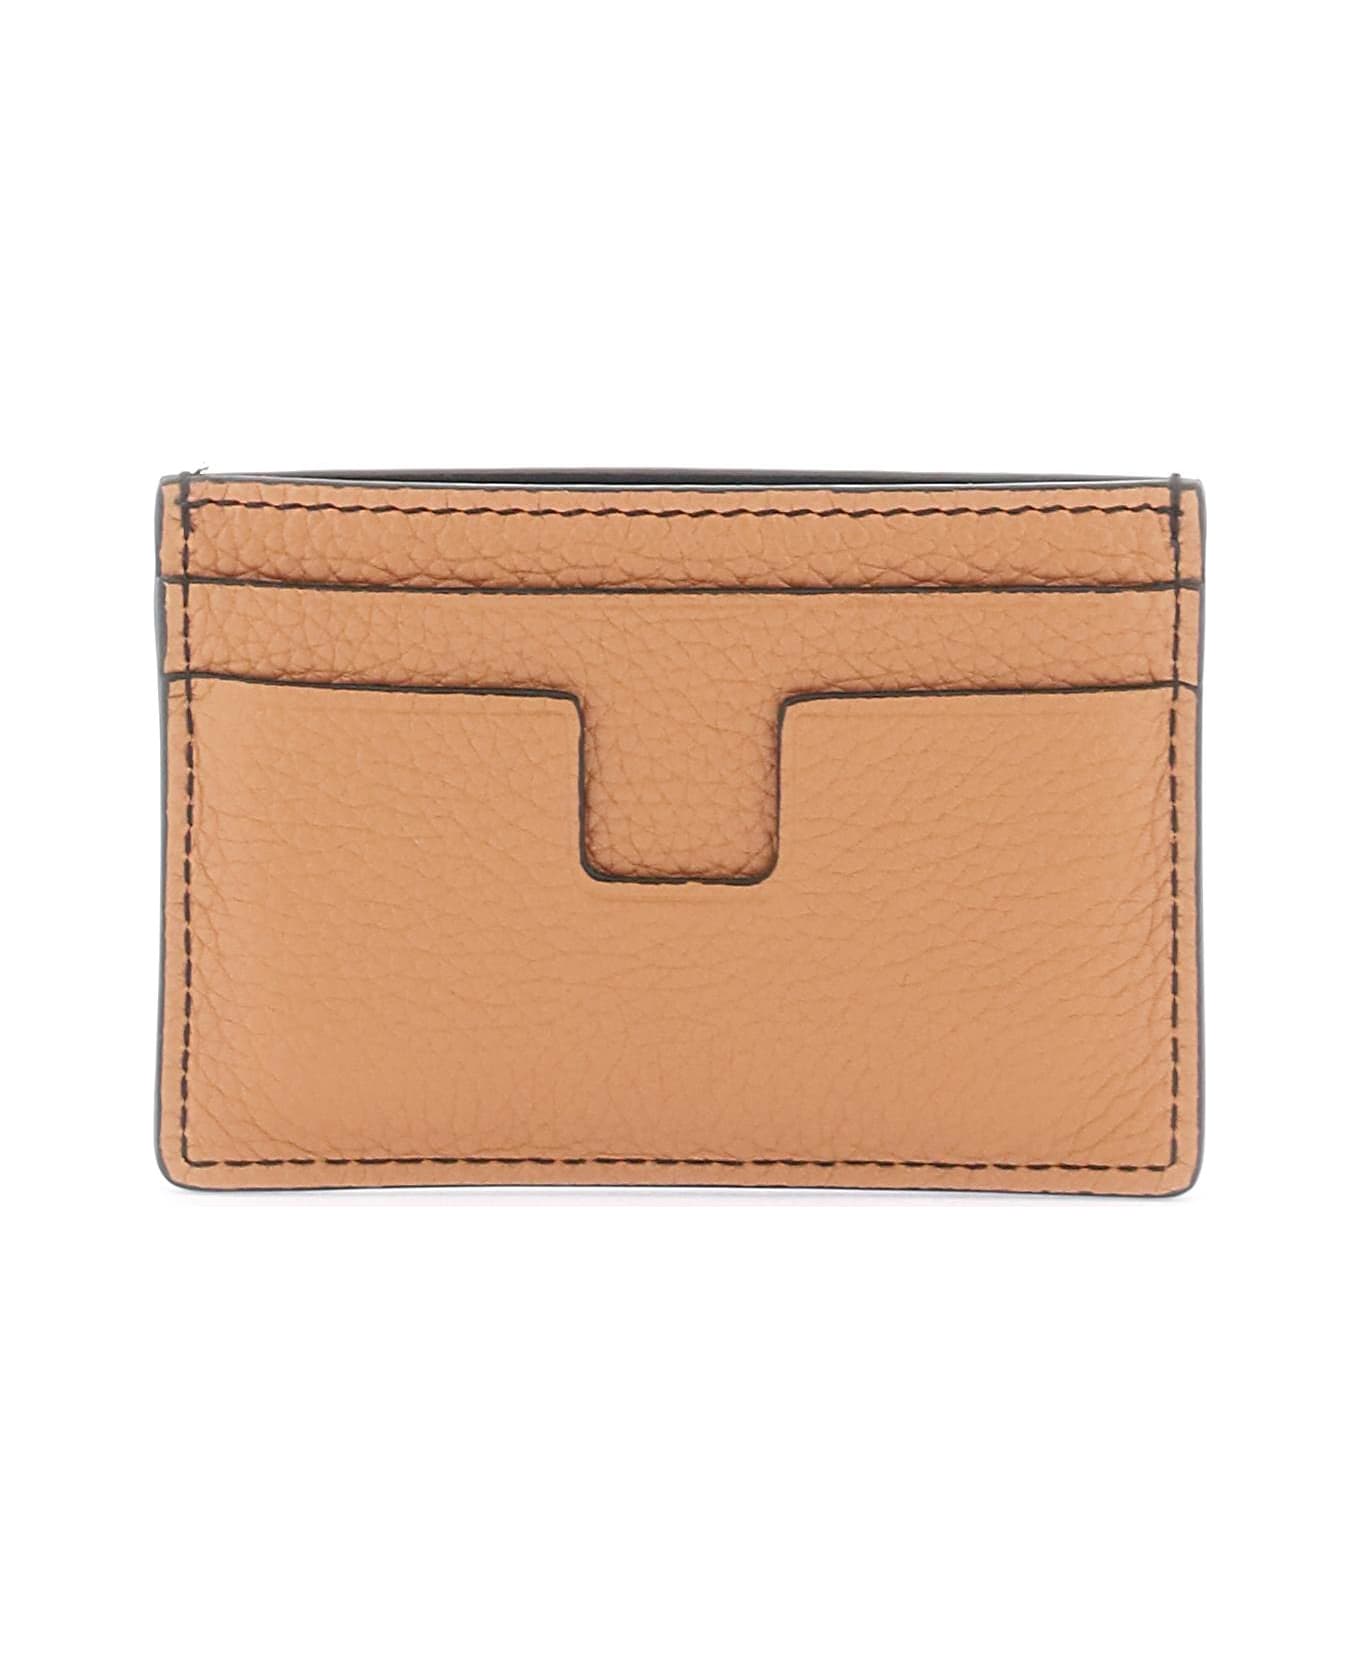 Tom Ford Grained Leather Card Holder - CHOCOLATE ALMOND (Beige)